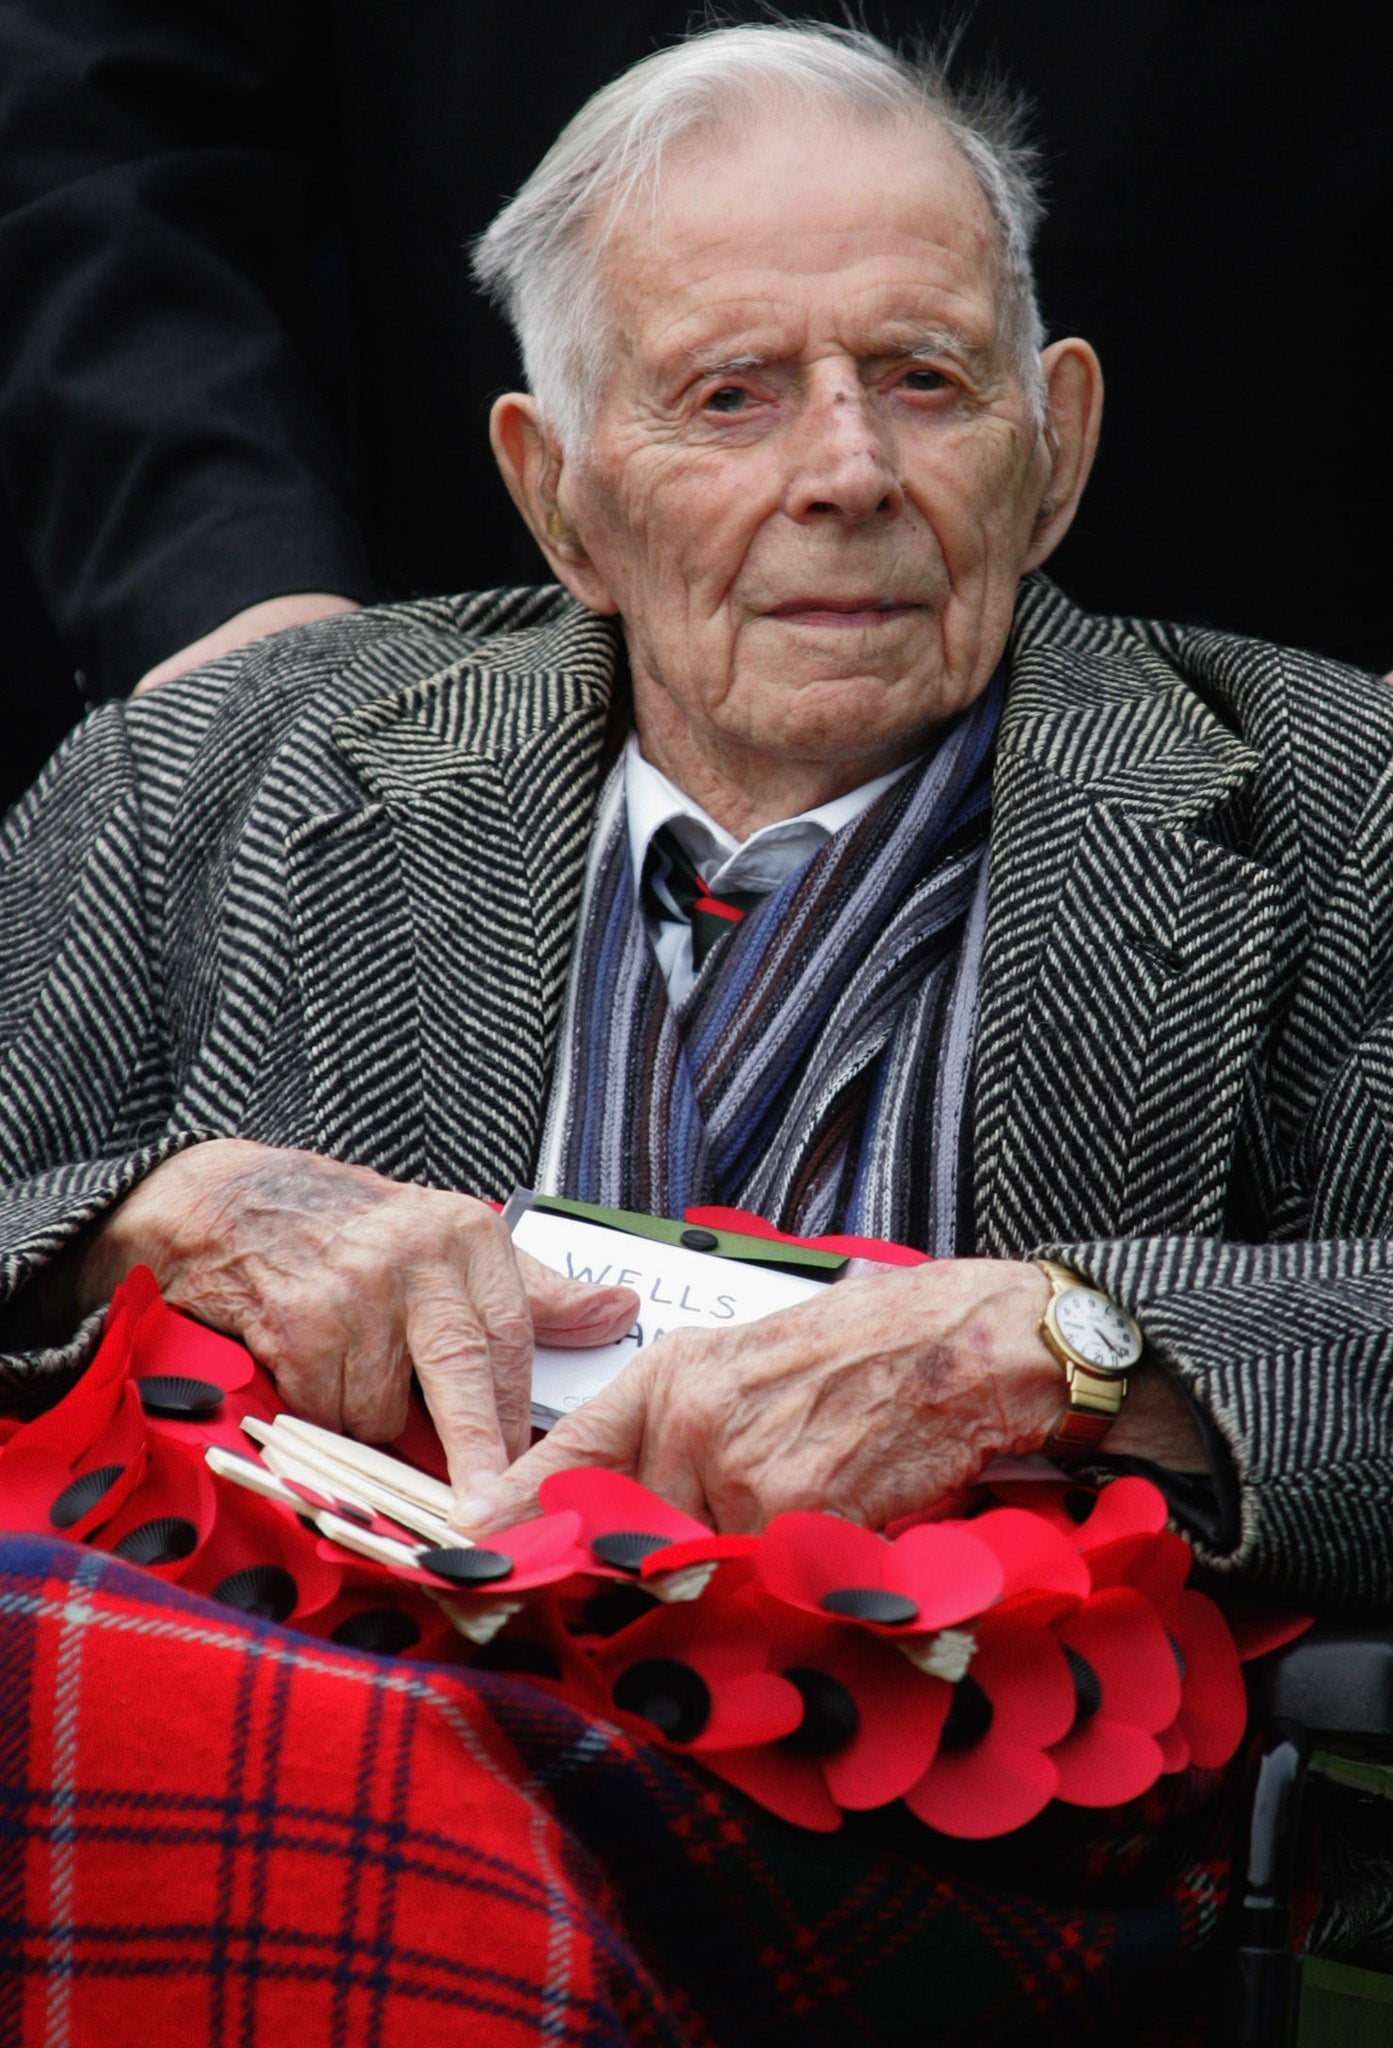 After the death of the last British survivor of the trenches, Harry Patch, above, the Government is keen to preserve the memories of the war for future generations.